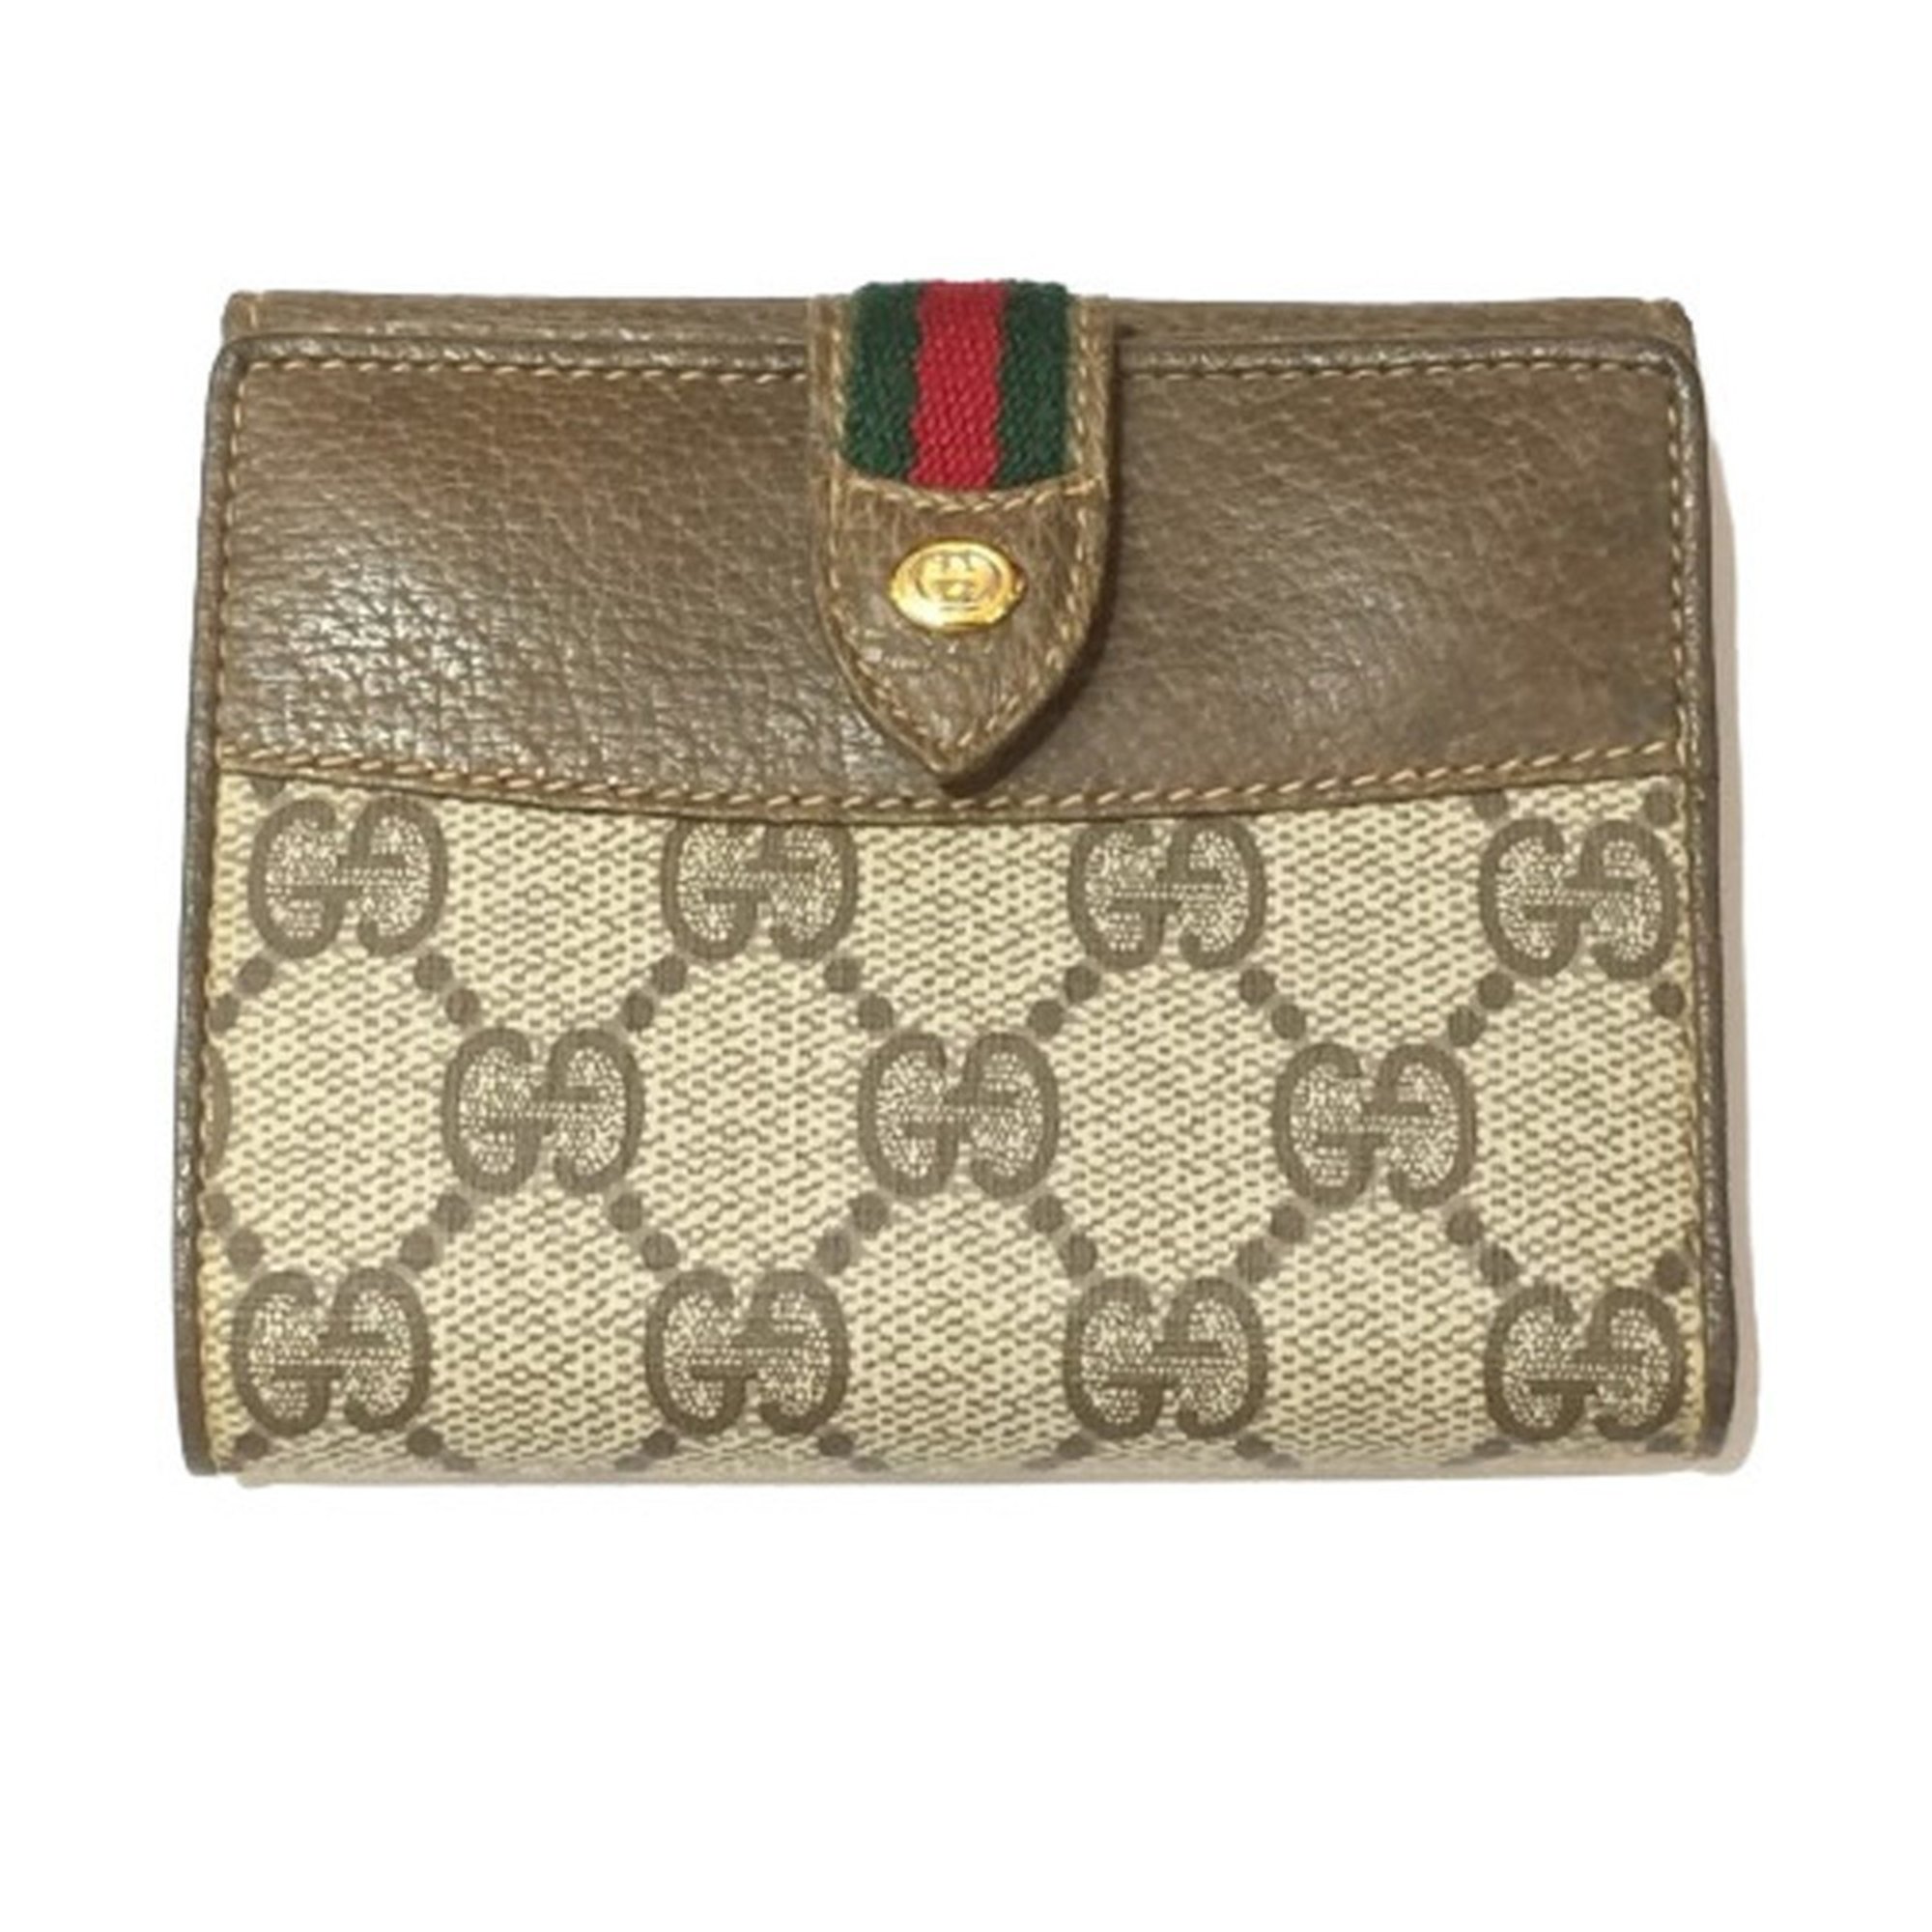 GUCCI OLD Sherry Line Compact Wallet Old Gucci Accessory collection GG pattern Men's Women's Accessories Kaizuka Store ITPKVHX4GVFQ RM1293D